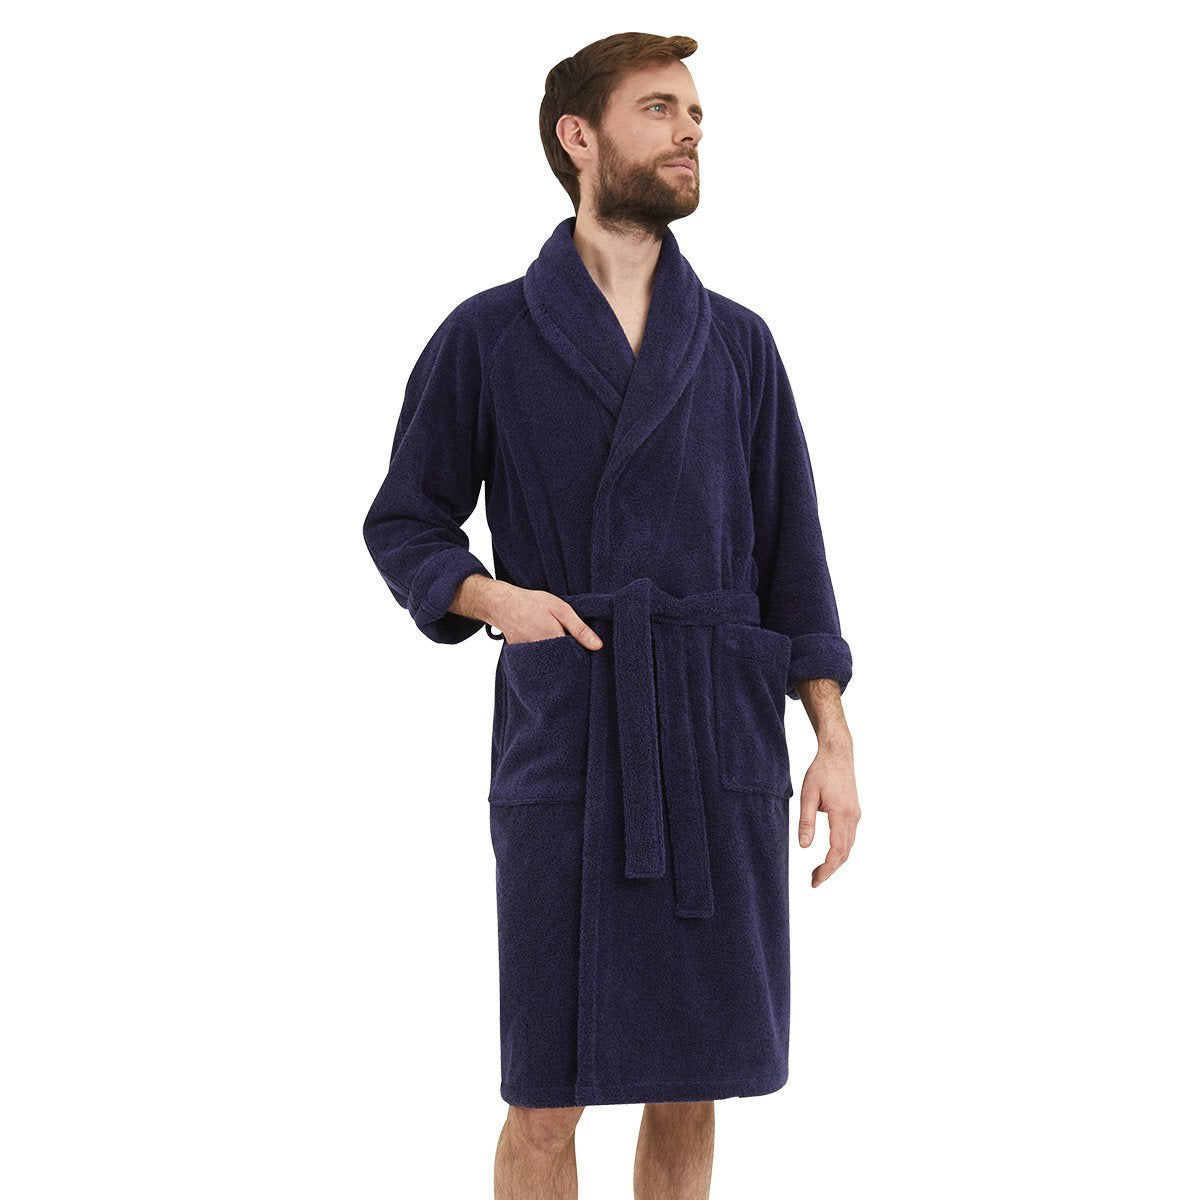 Etoile Marine Bathrobe - Yves Delorme Towel Collection - FIG LINENS AND ...